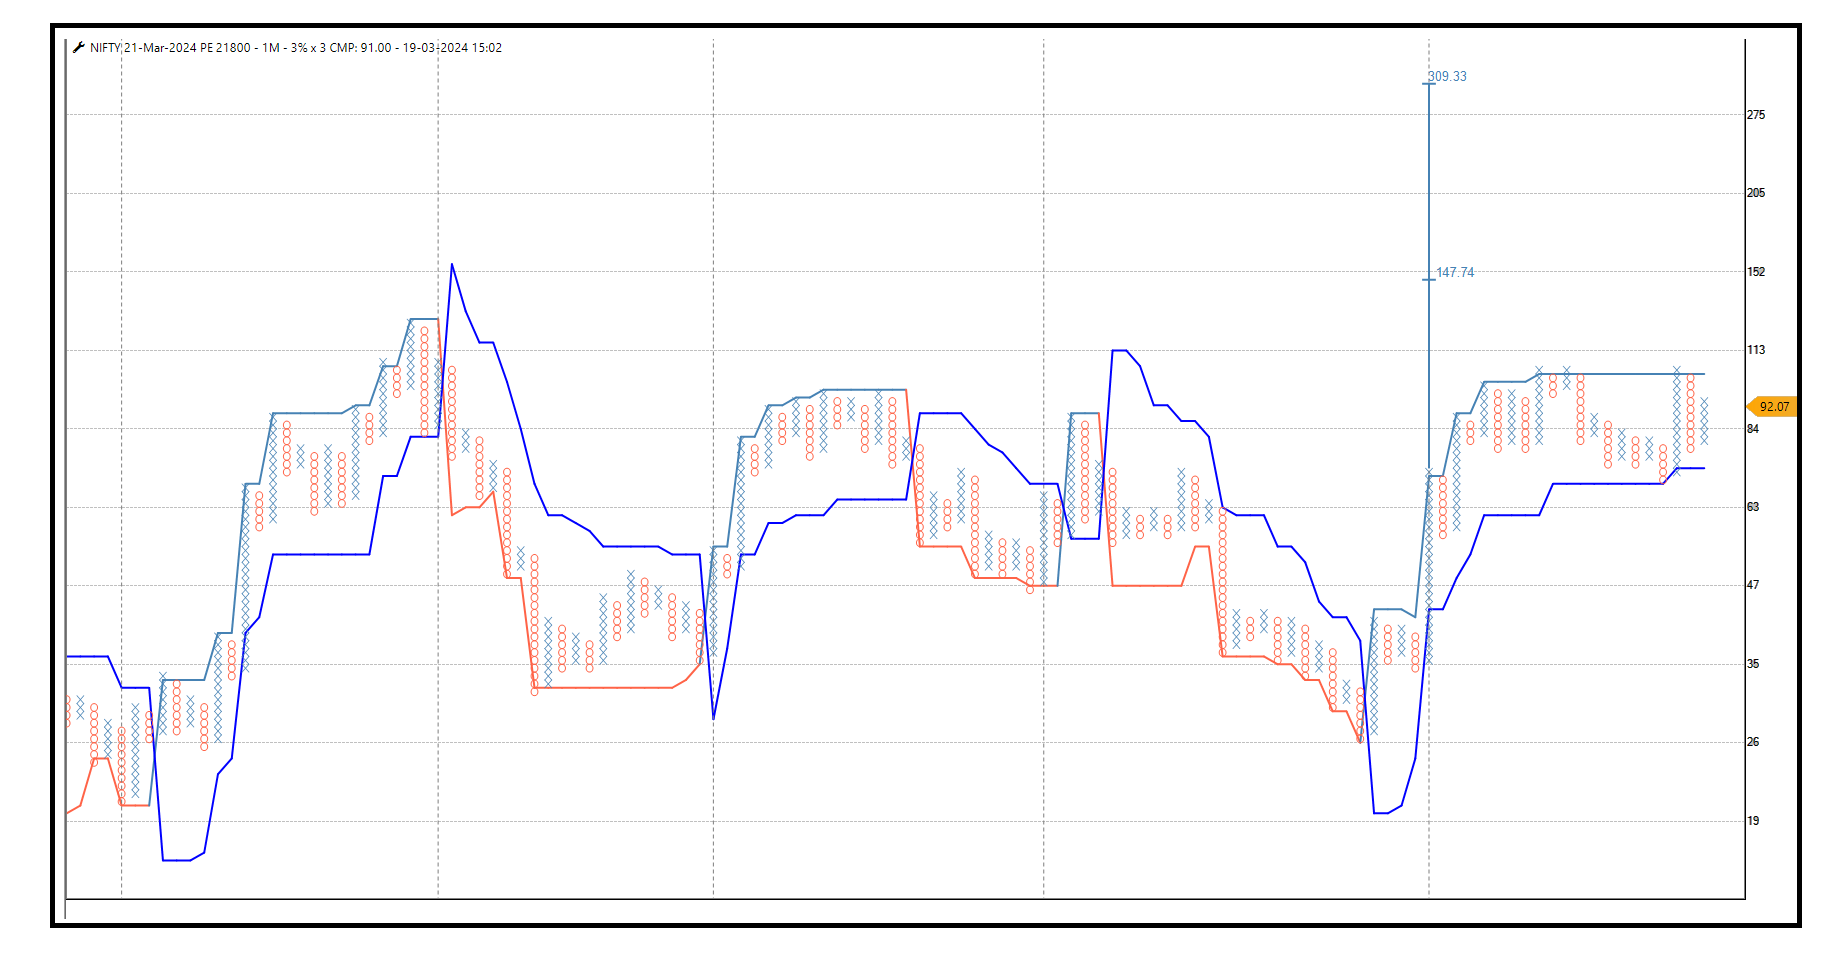 1903- Nifty 21800 pe.png